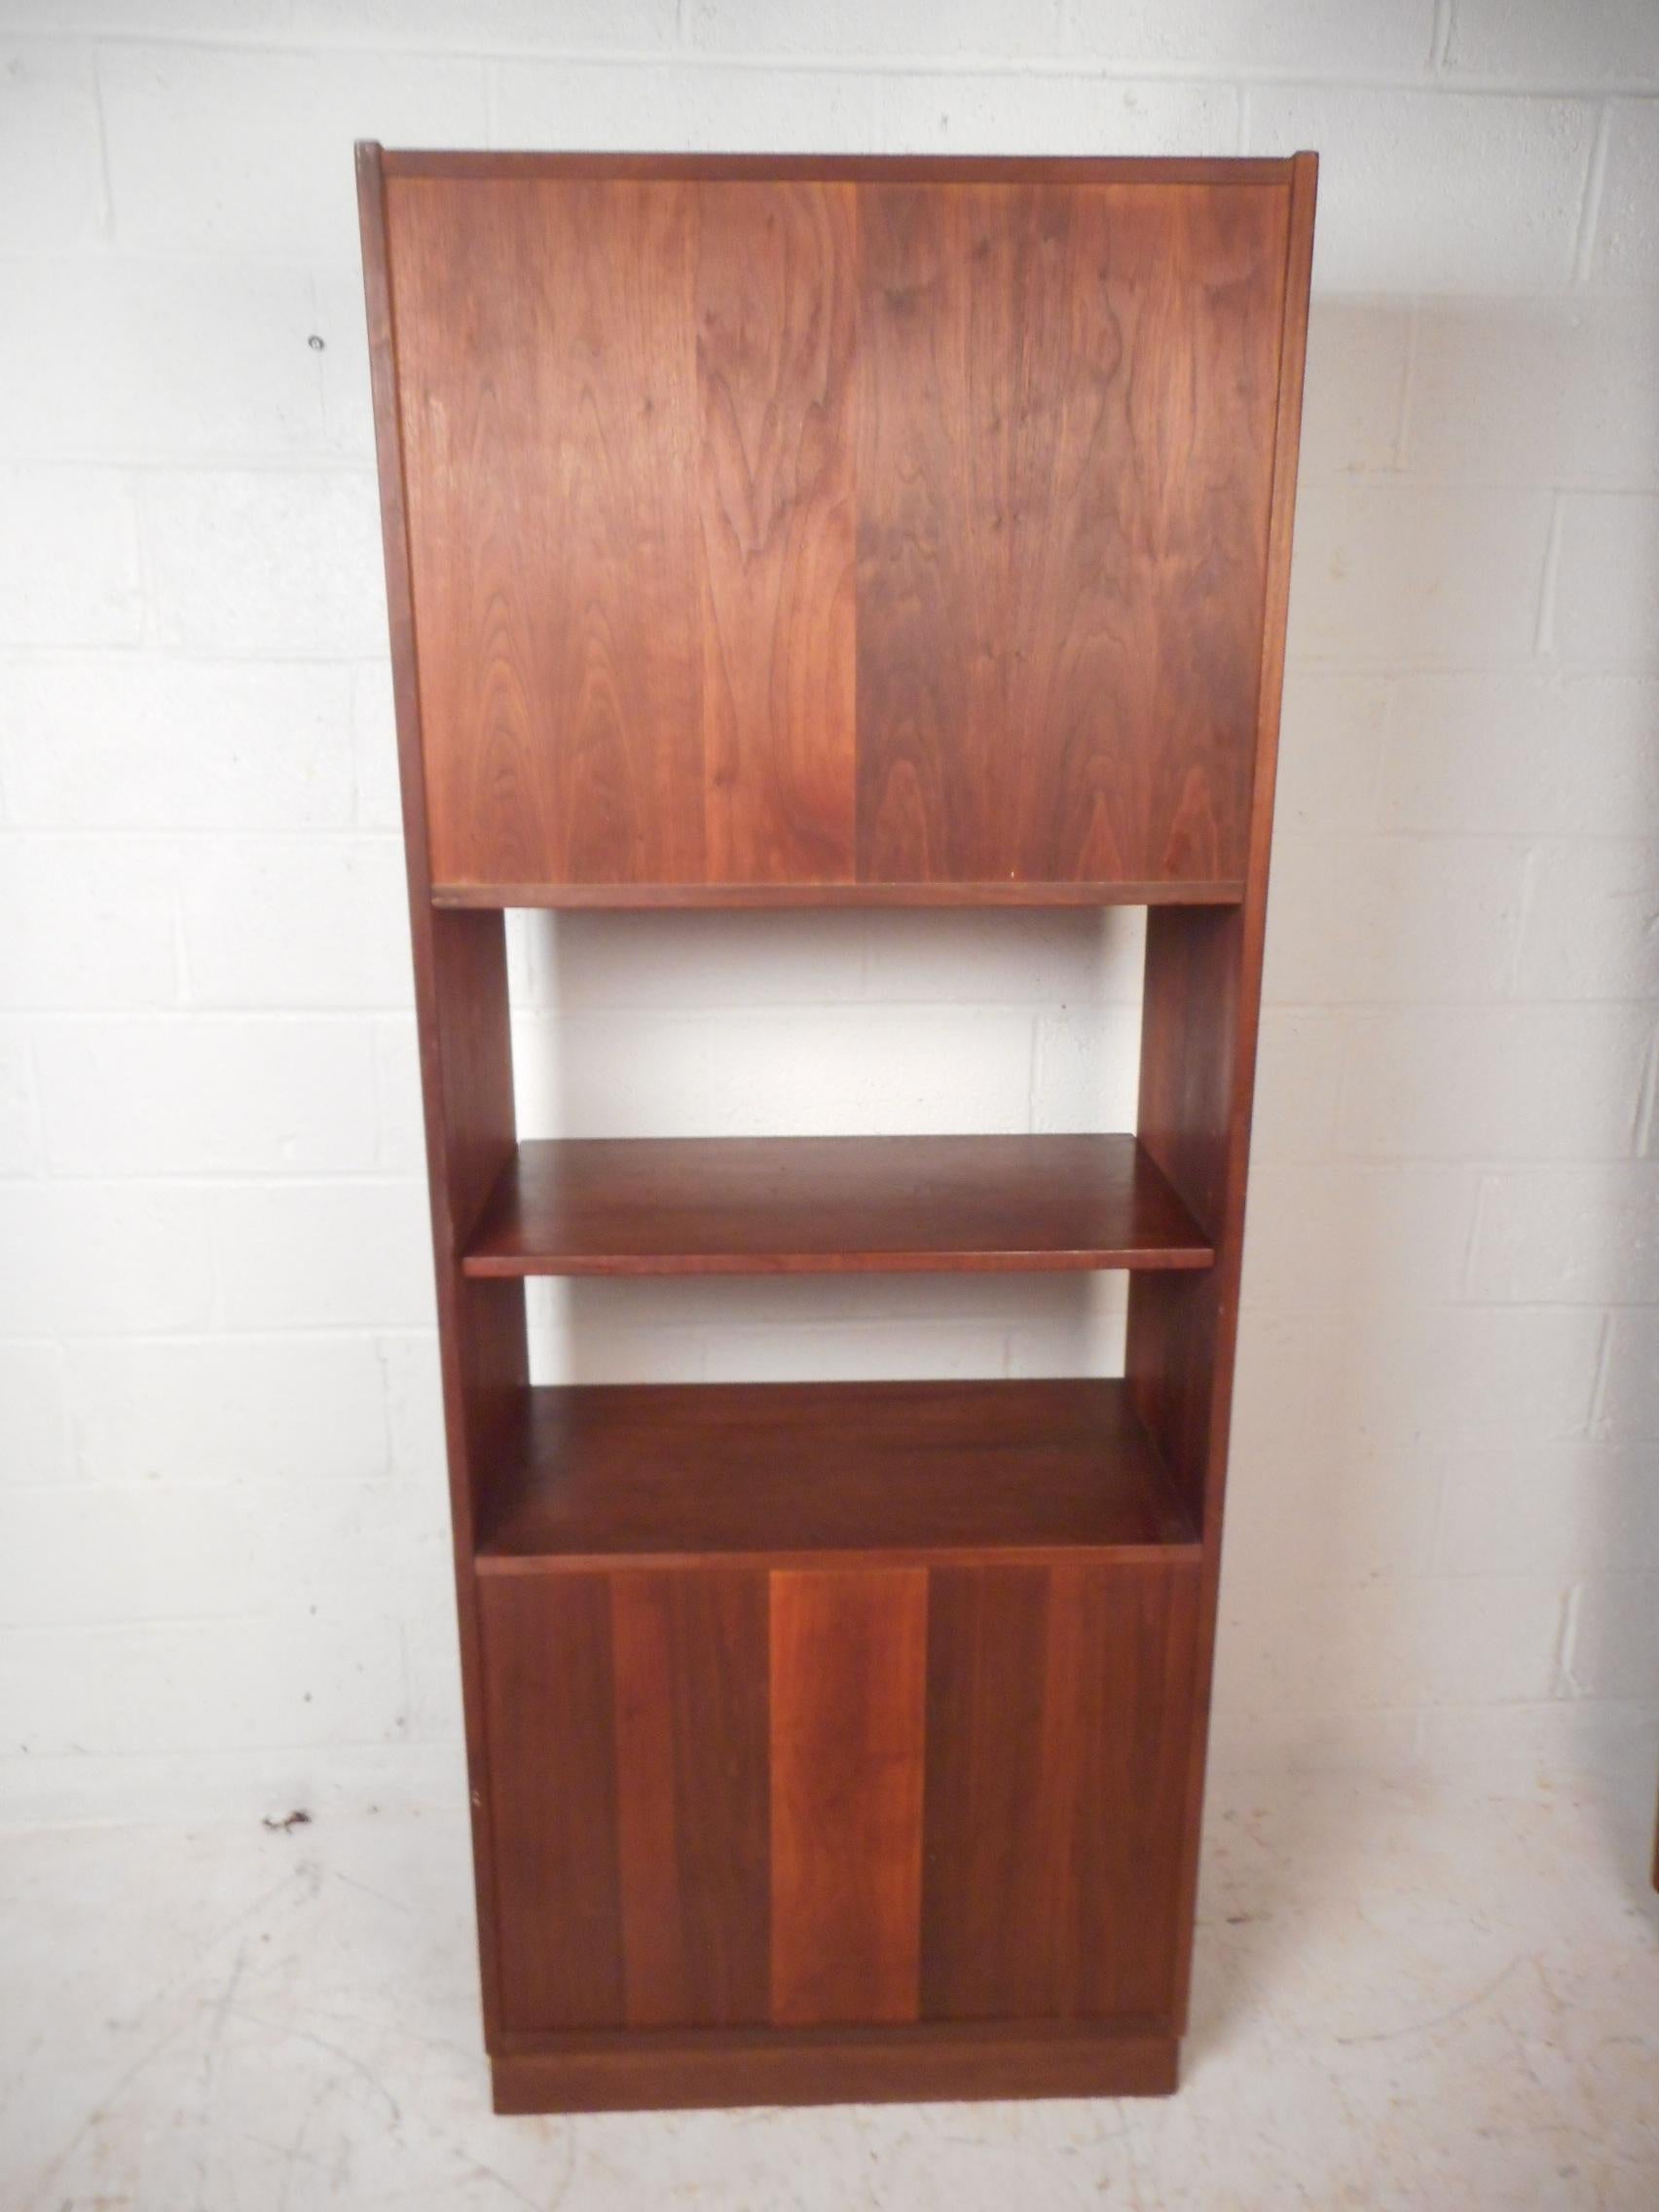 Cane Pair of Mid-Century Modern Bookcases or Shelves